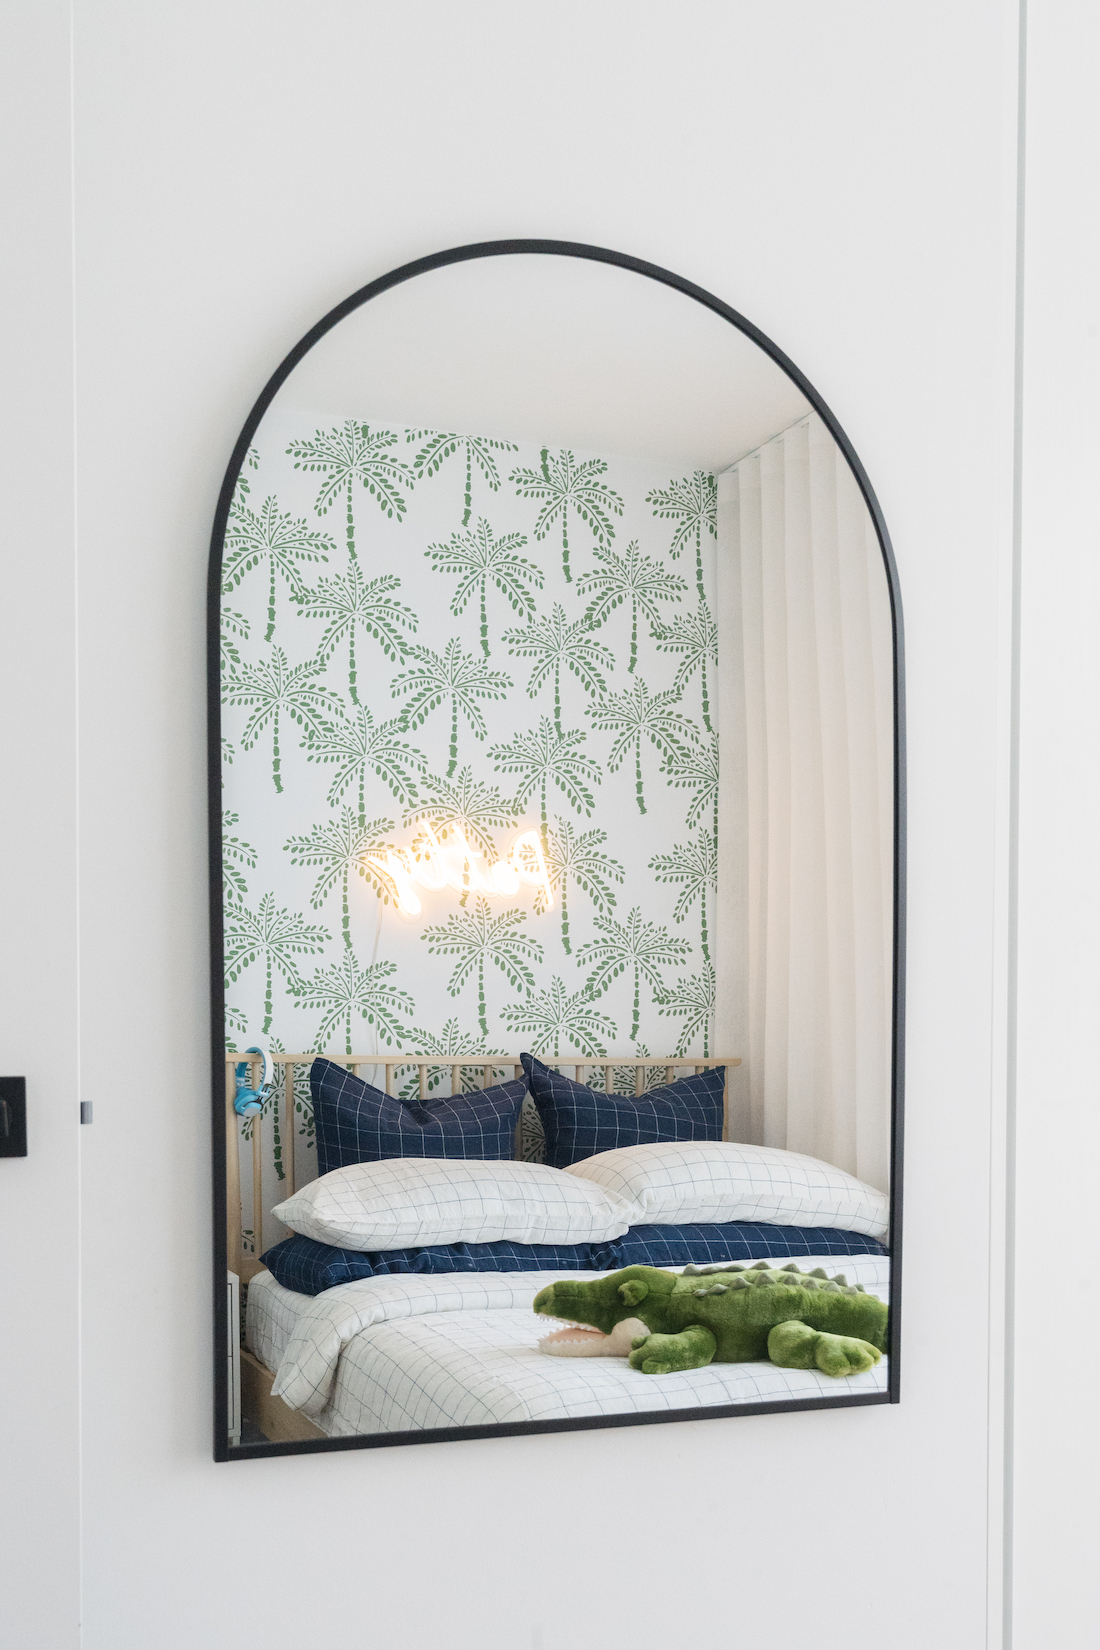 Arch mirror reflection adds contemporary element to boy's bedroom design